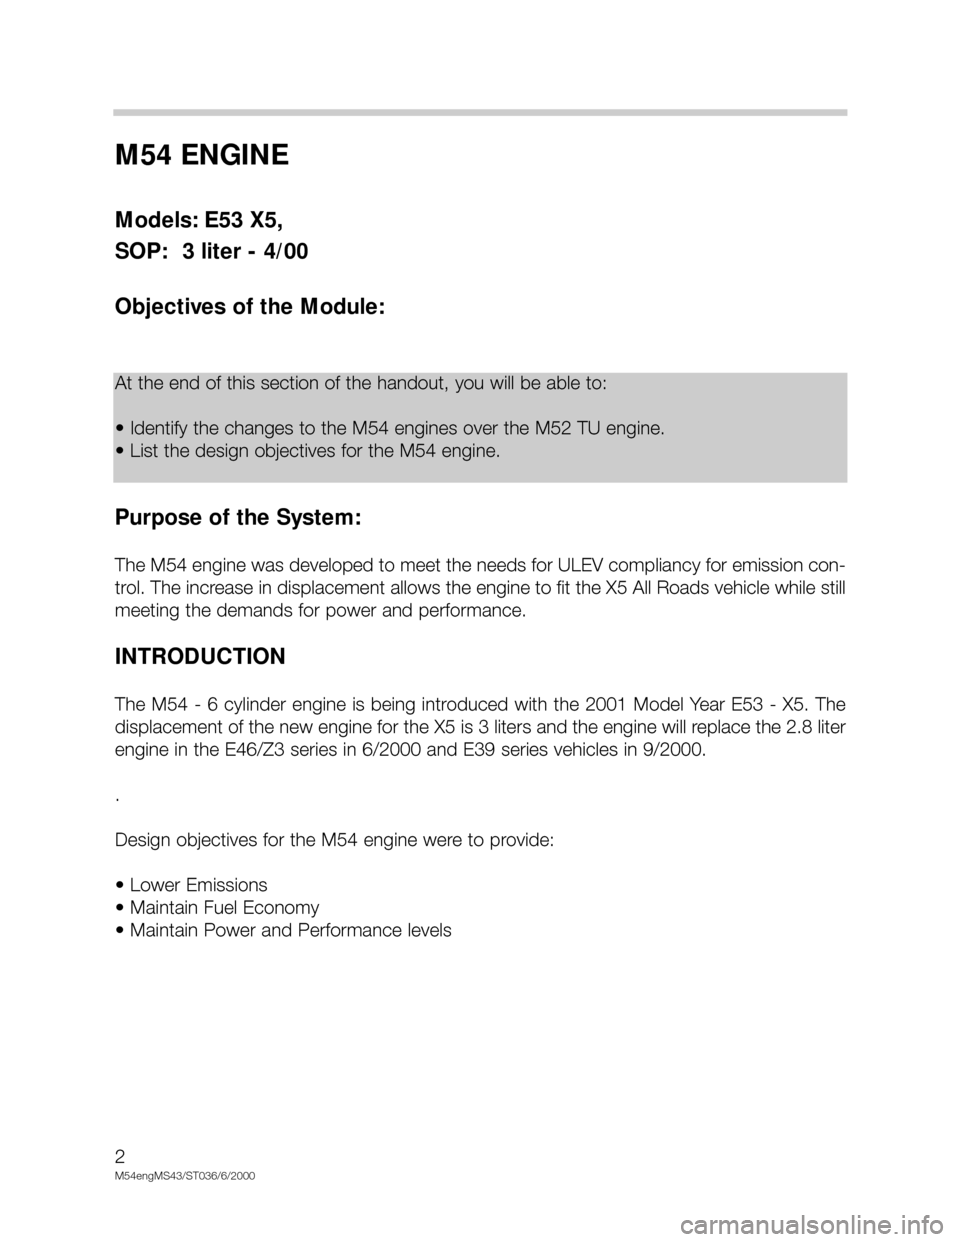 BMW X5 1999 E53 M54 Engine Workshop Manual M54 ENGINE 
Models: E53 X5, 
SOP:  3 liter - 4/00
Objectives of the Module:
Purpose of the System:
The M54 engine was developed to meet the needs for ULEV compliancy for emission con-
trol. The increa